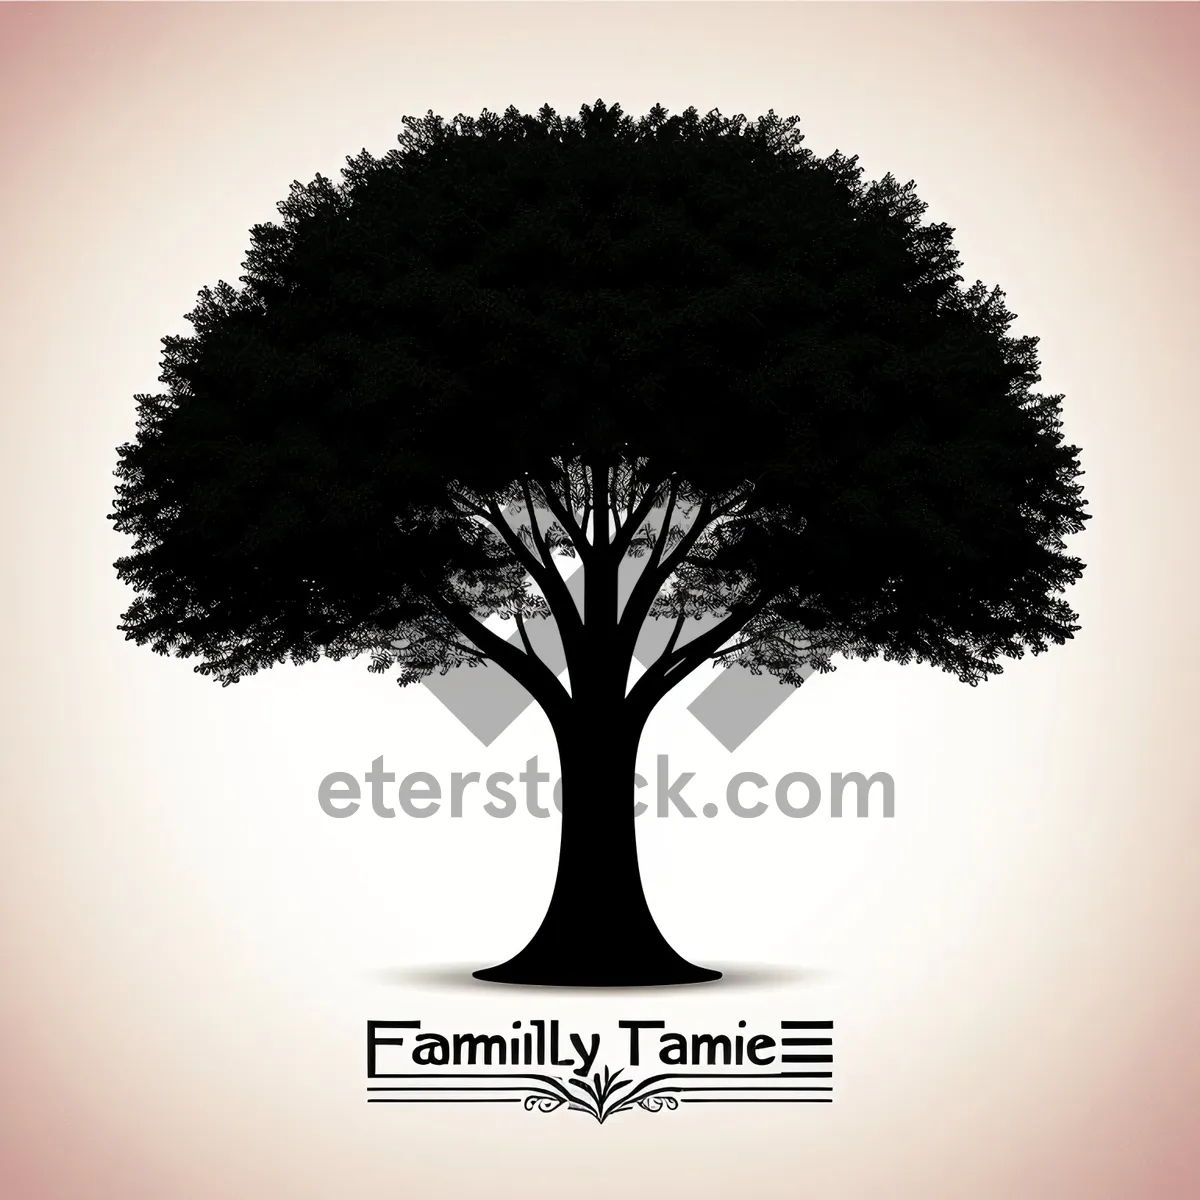 Picture of Silhouette of Evergreen Oak Tree Branch